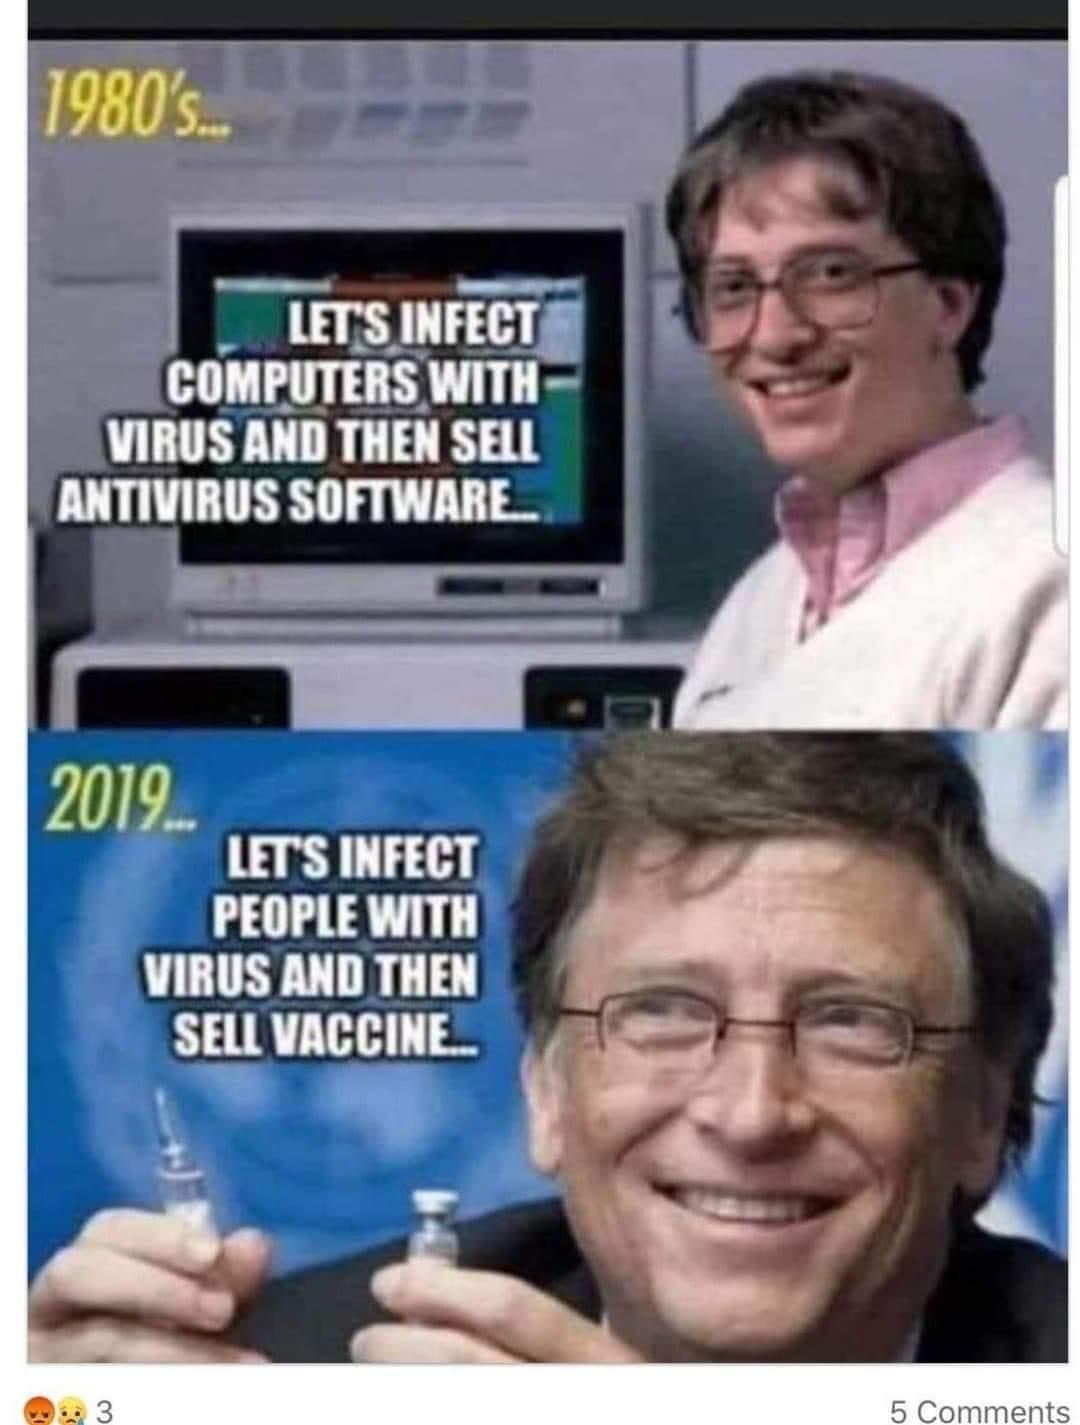 Political, Let, Bill Gates, Gates, Antivirus, Win1 boomer memes Political, Let, Bill Gates, Gates, Antivirus, Win1 text: tm INFECT LCOMRUTERS.WITH VIRUSANDTHENSEU ANTIVIRUS SOFTWARE- 2019- tm INFECT PEOPLE WITH THEN SELL VACCINE.- 5 Comments 